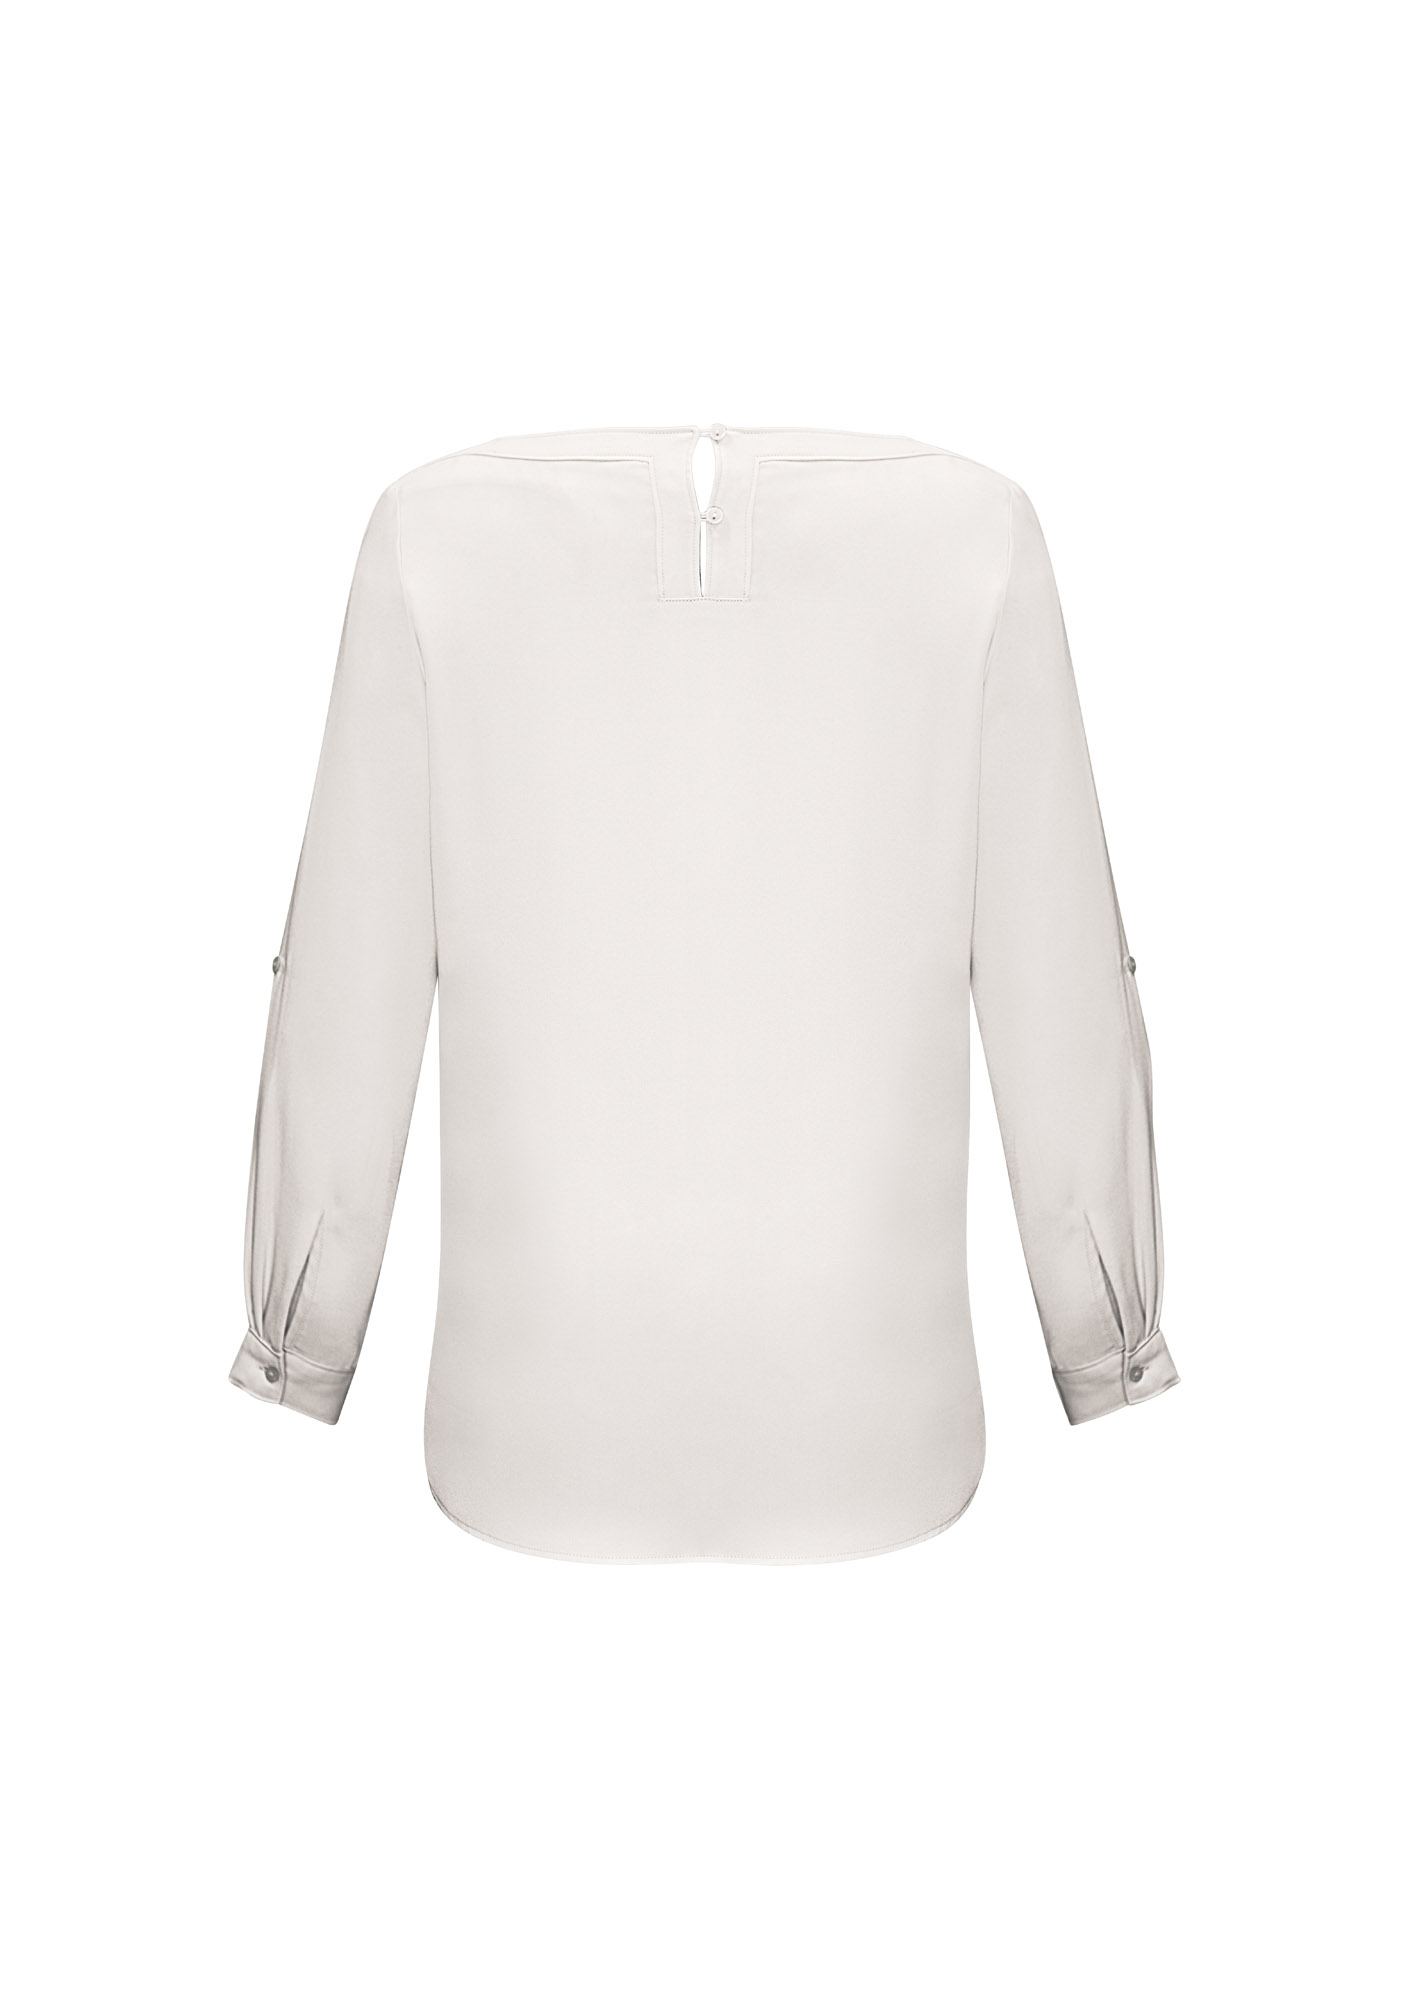 Ladies Madison Boatneck Blouse | Uniform Tops for Office | Madison ...